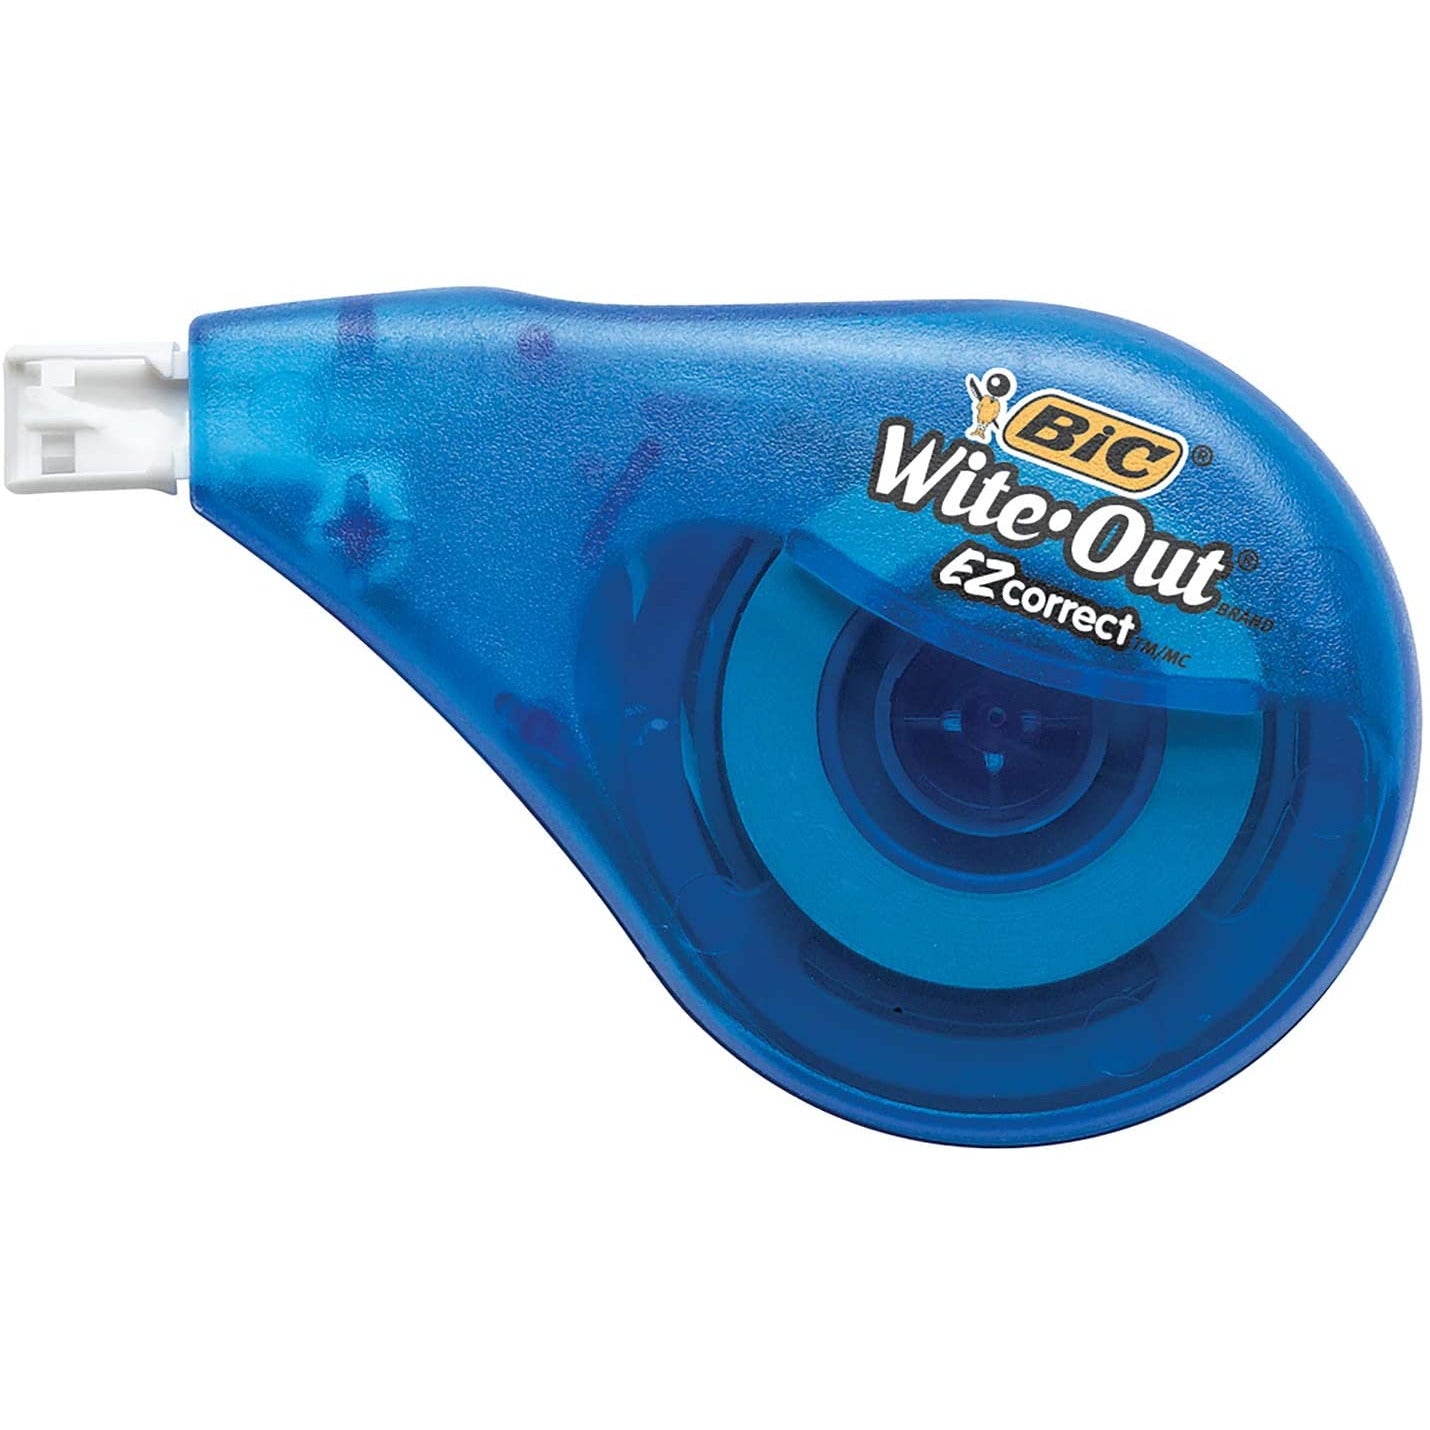 Bic Wite-Out EZ Correct Correction Tape, 1 Ct